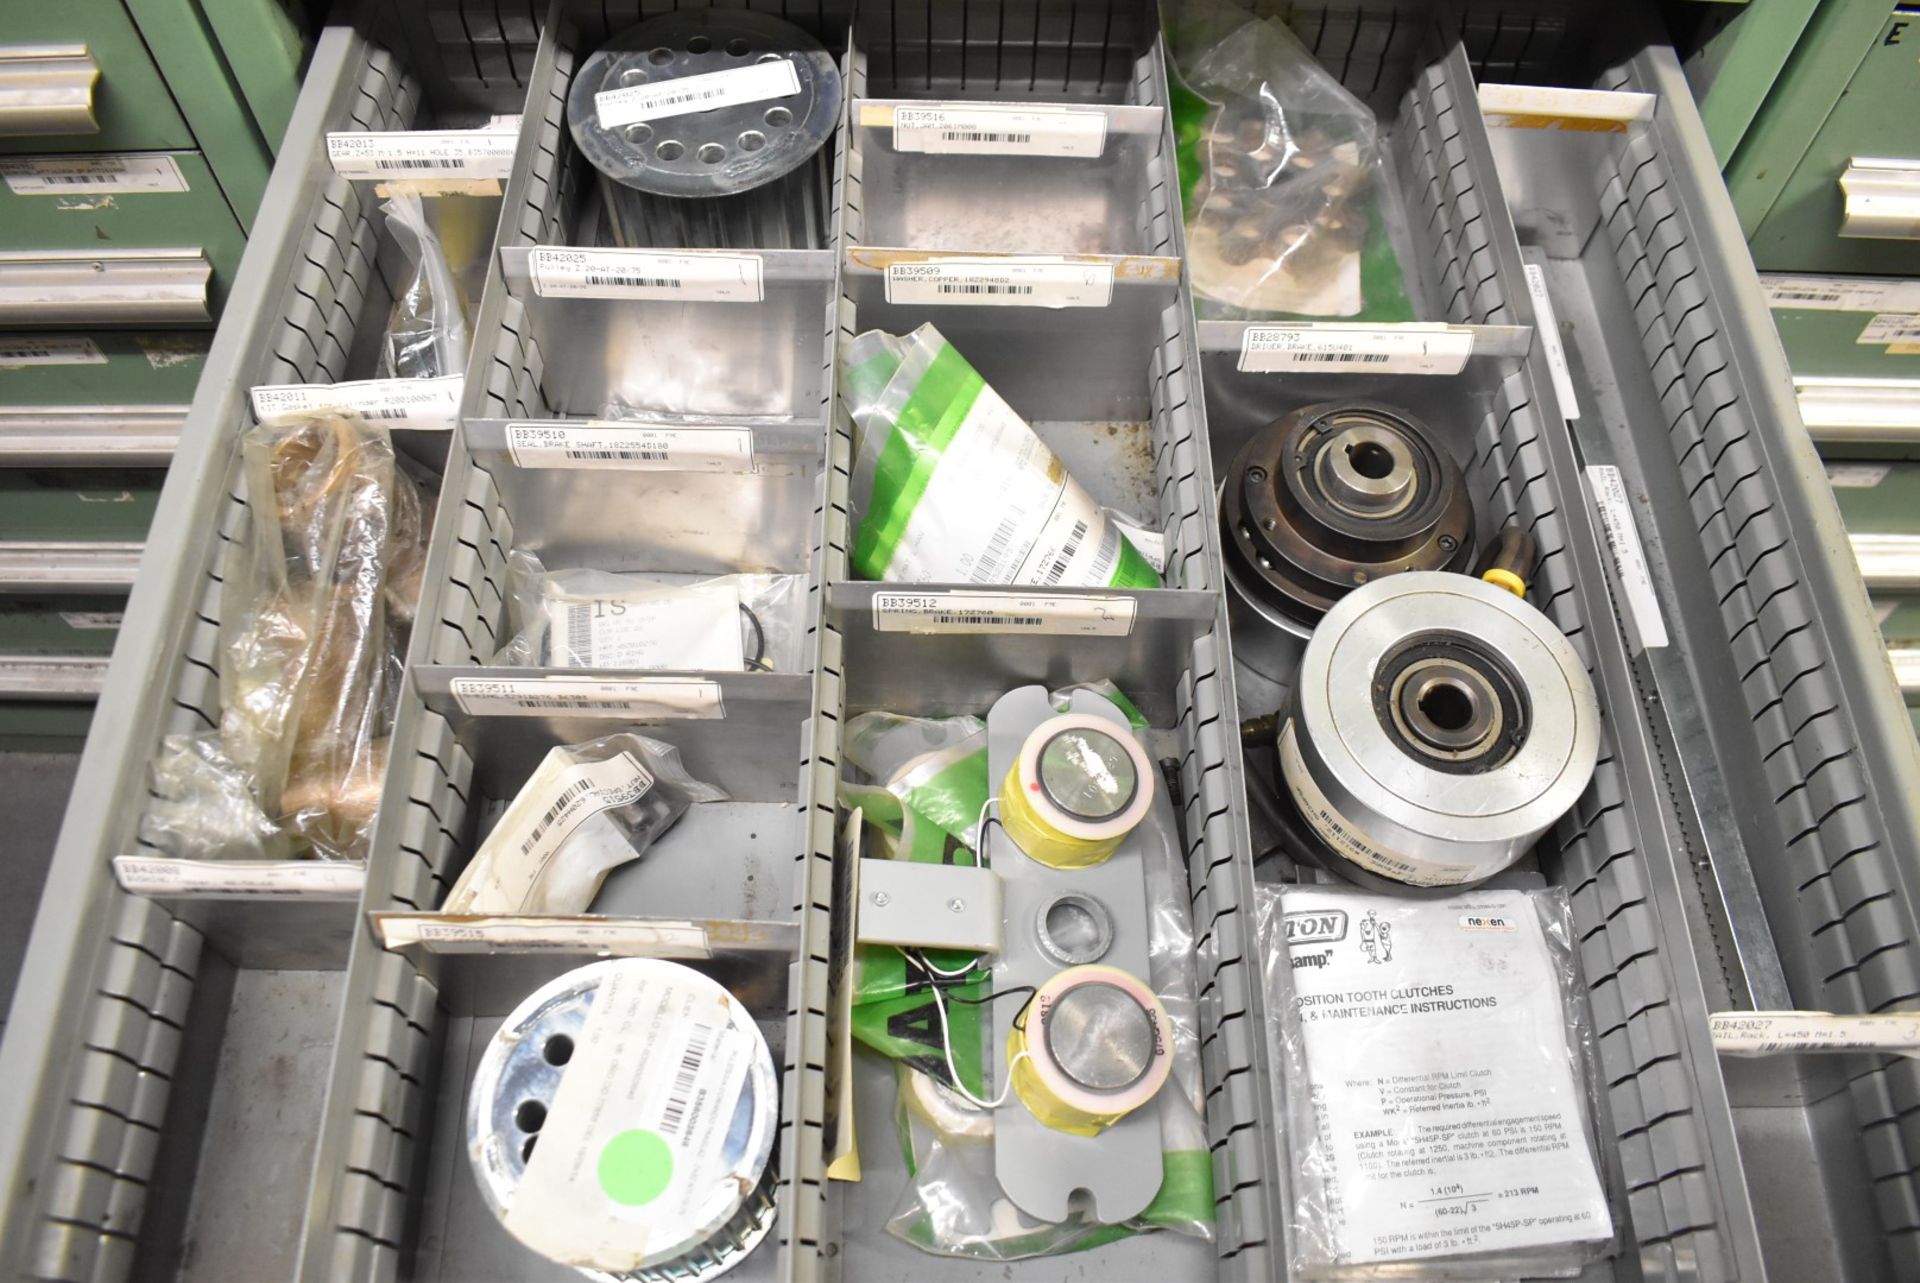 LOT/ CONTENTS OF CABINET - INCLUDING SPACERS, PRISMATIC SLIDER GUIDES, FESTO CYLINDERS, PULLEYS, - Image 5 of 7